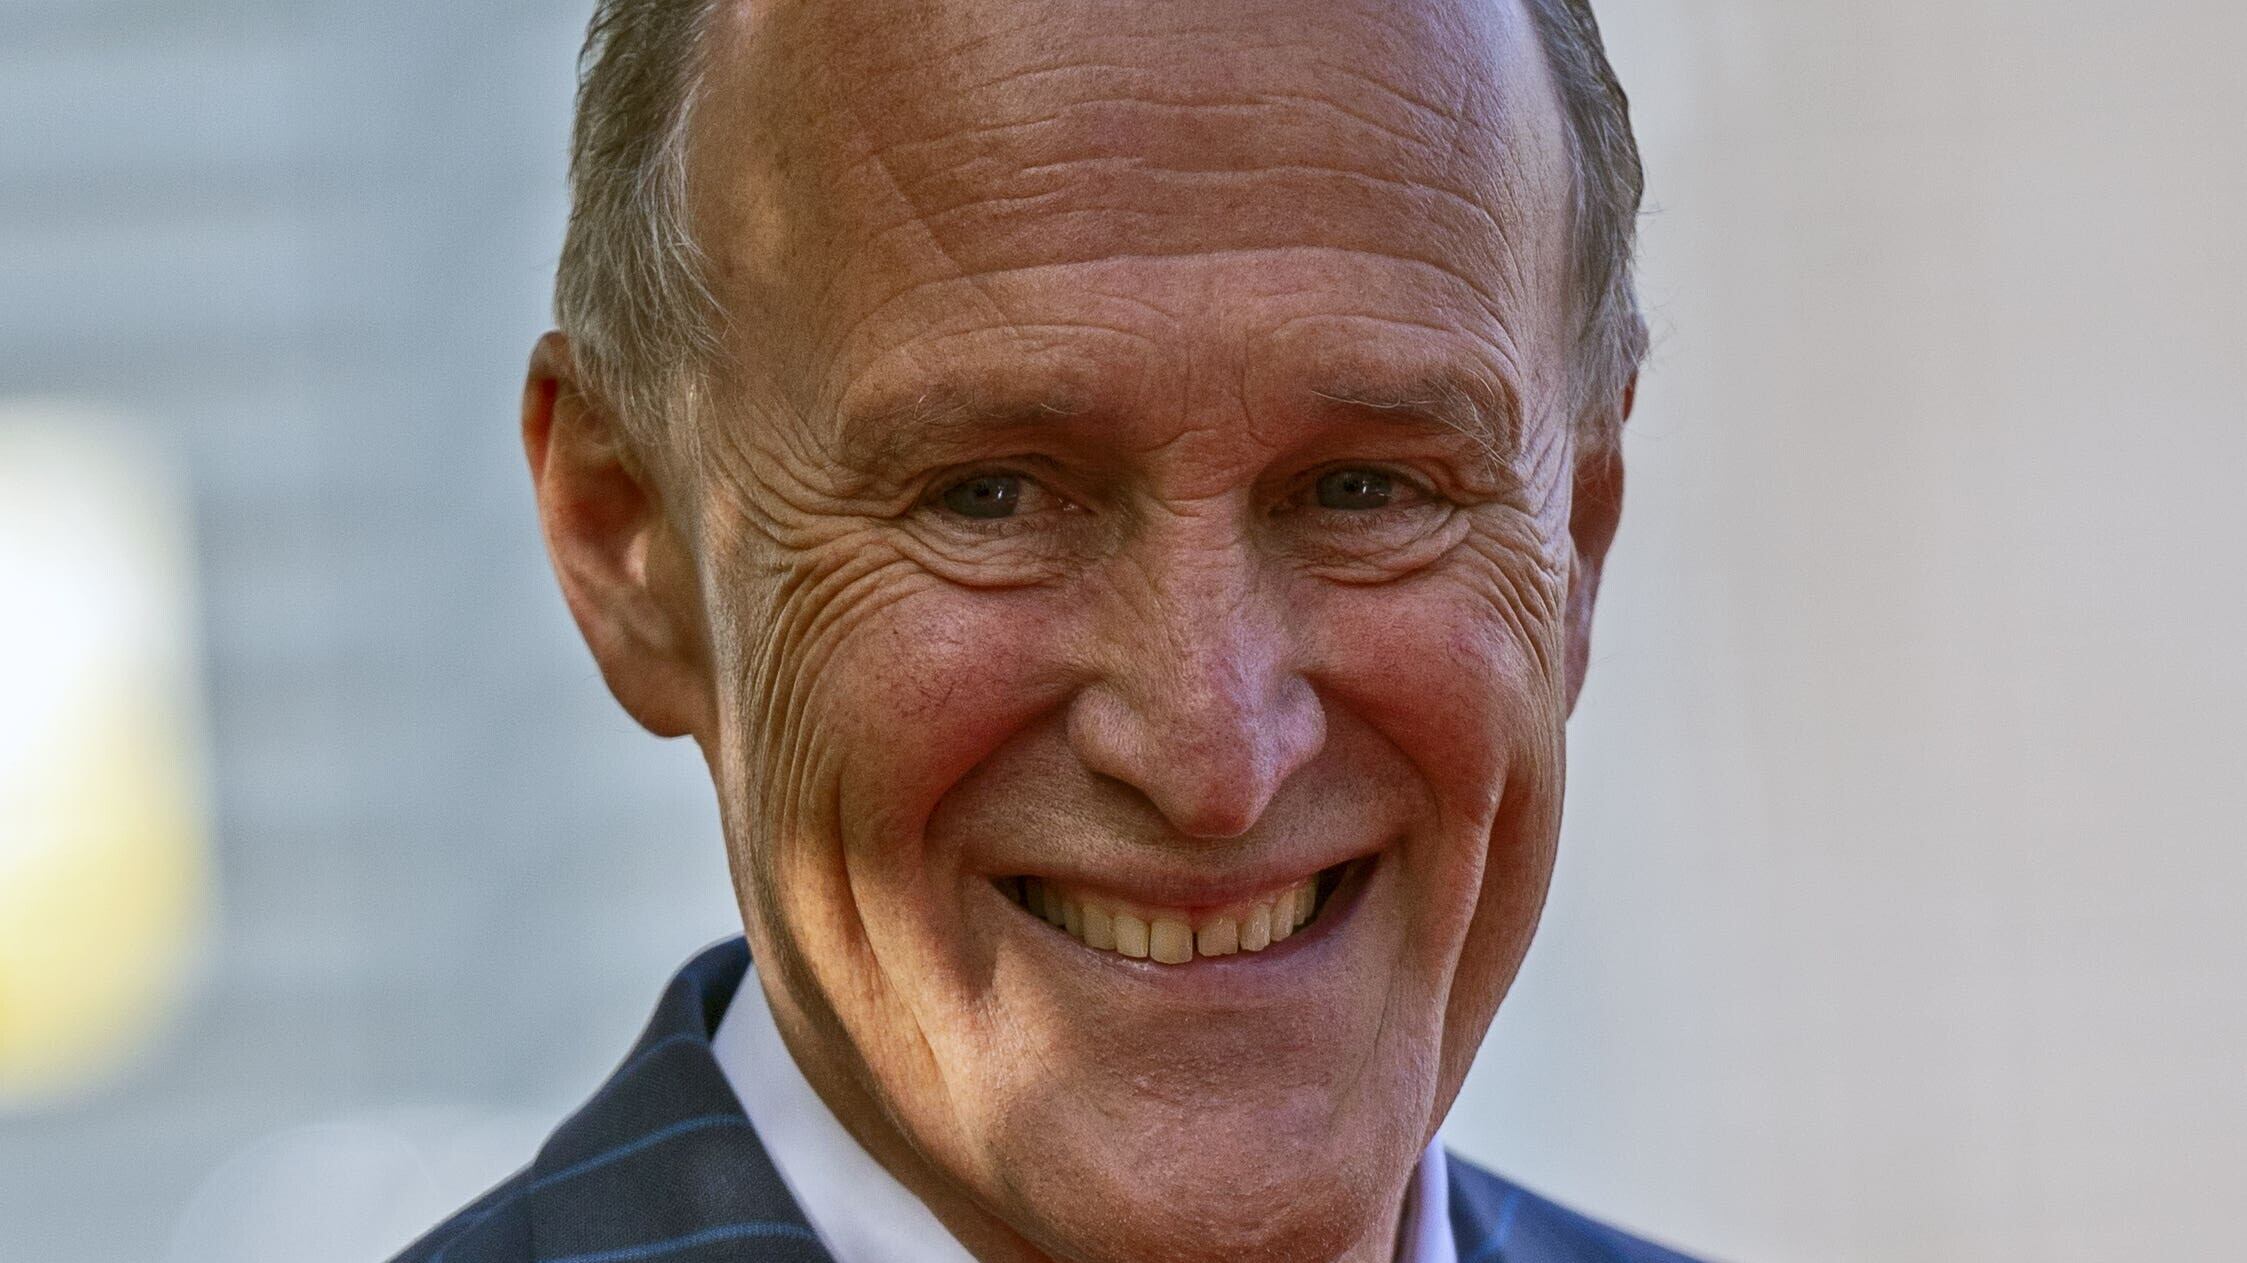 Sir Peter Bazalgette delivered a speech discussing the future of public service broadcasters.